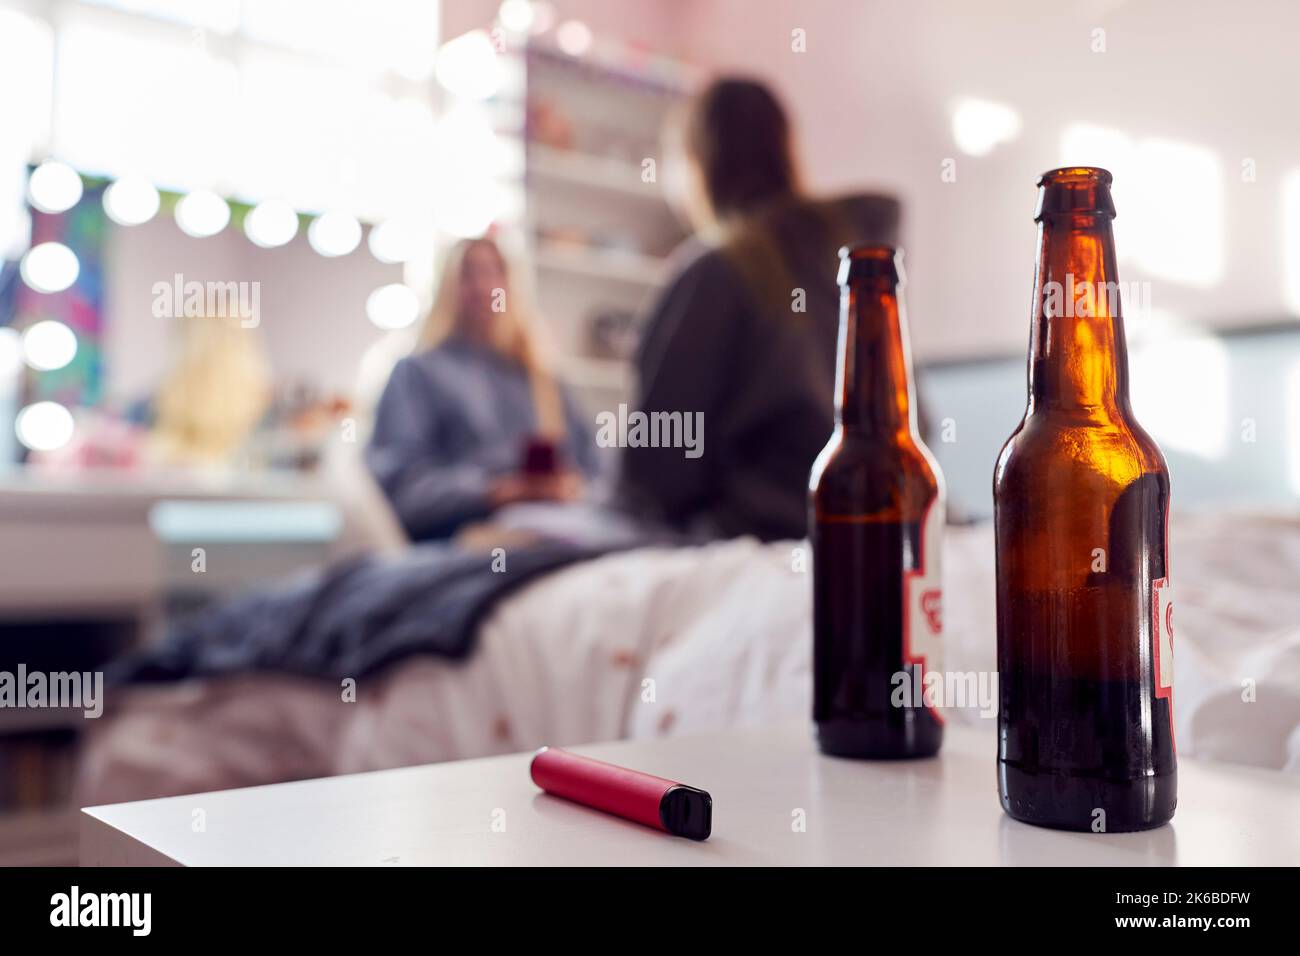 Group Of Teenage Girls In Bedroom With Bottles Of Beer And Vape Pen In Foreground Stock Photo